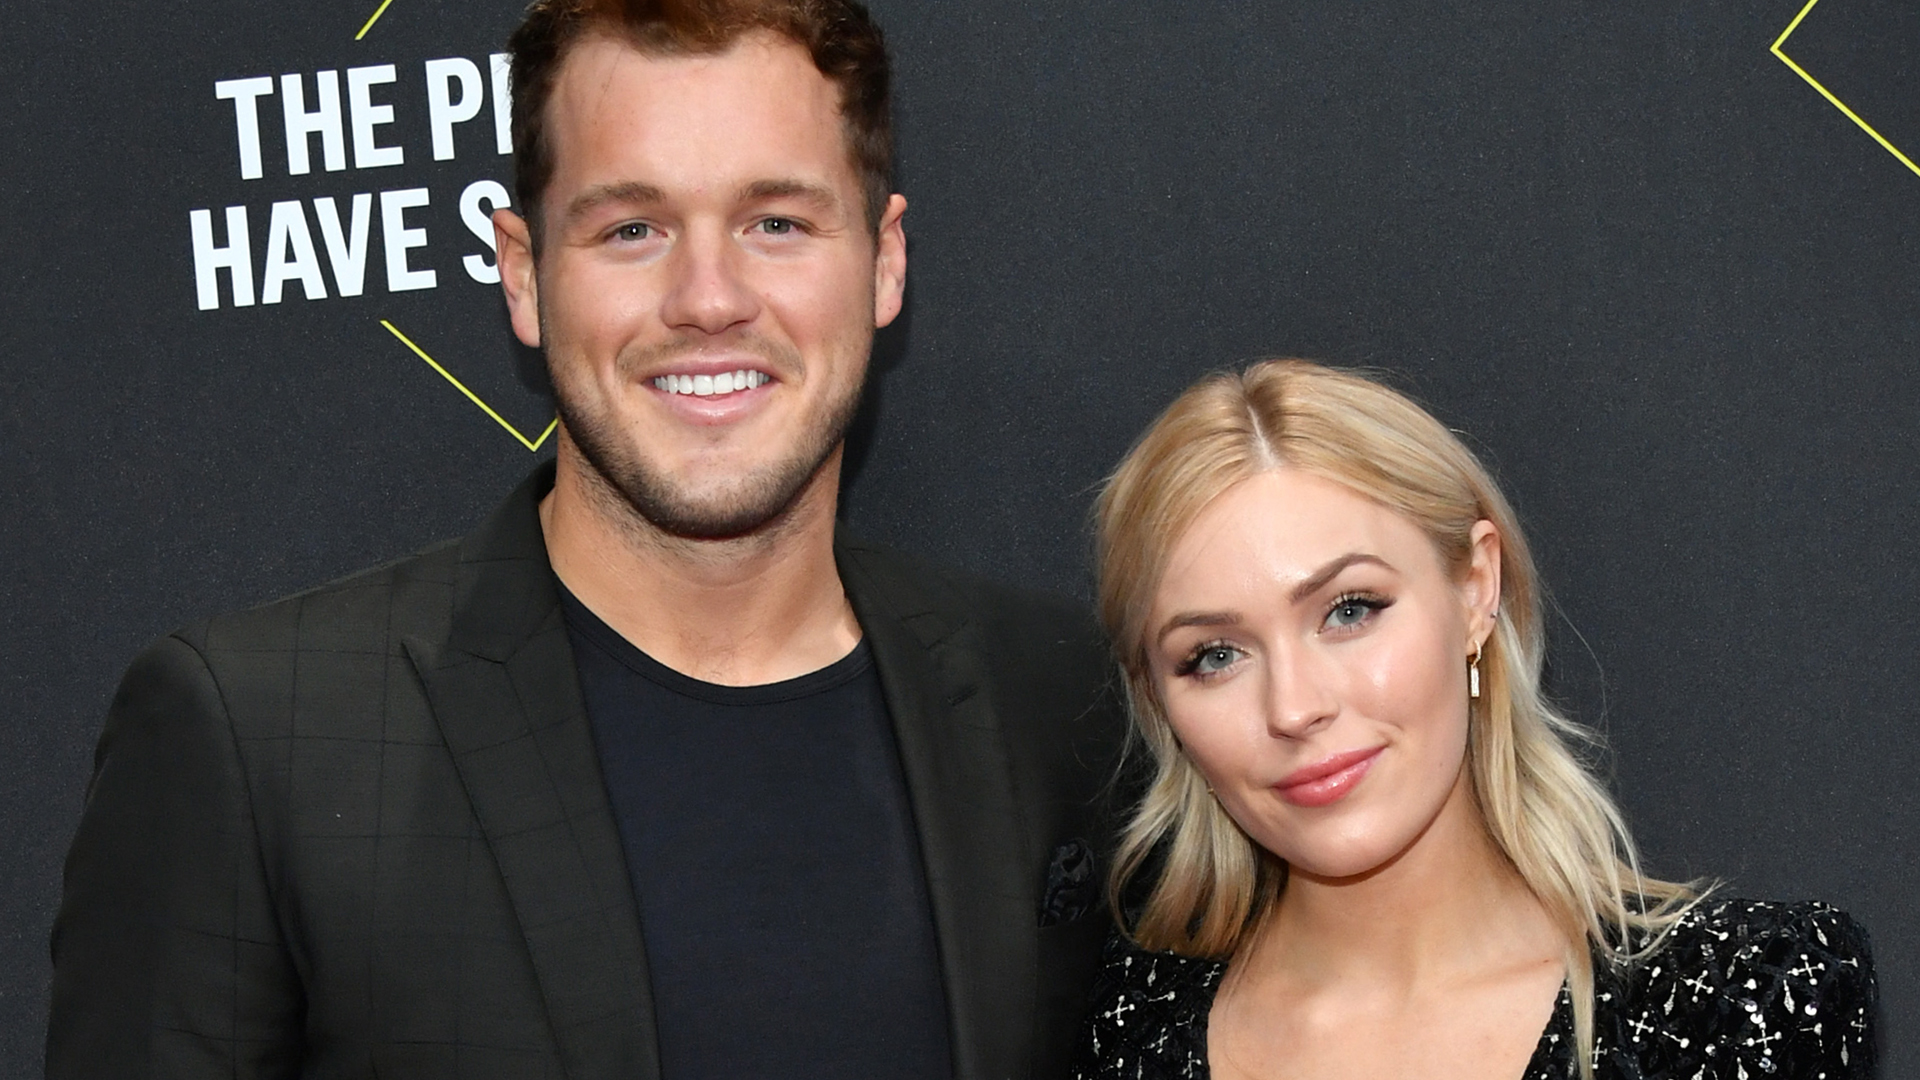 Colton Underwood and Cassie Randolph arrive to the 2019 E! People's Choice Awards held at the Barker Hangar on November 10, 2019